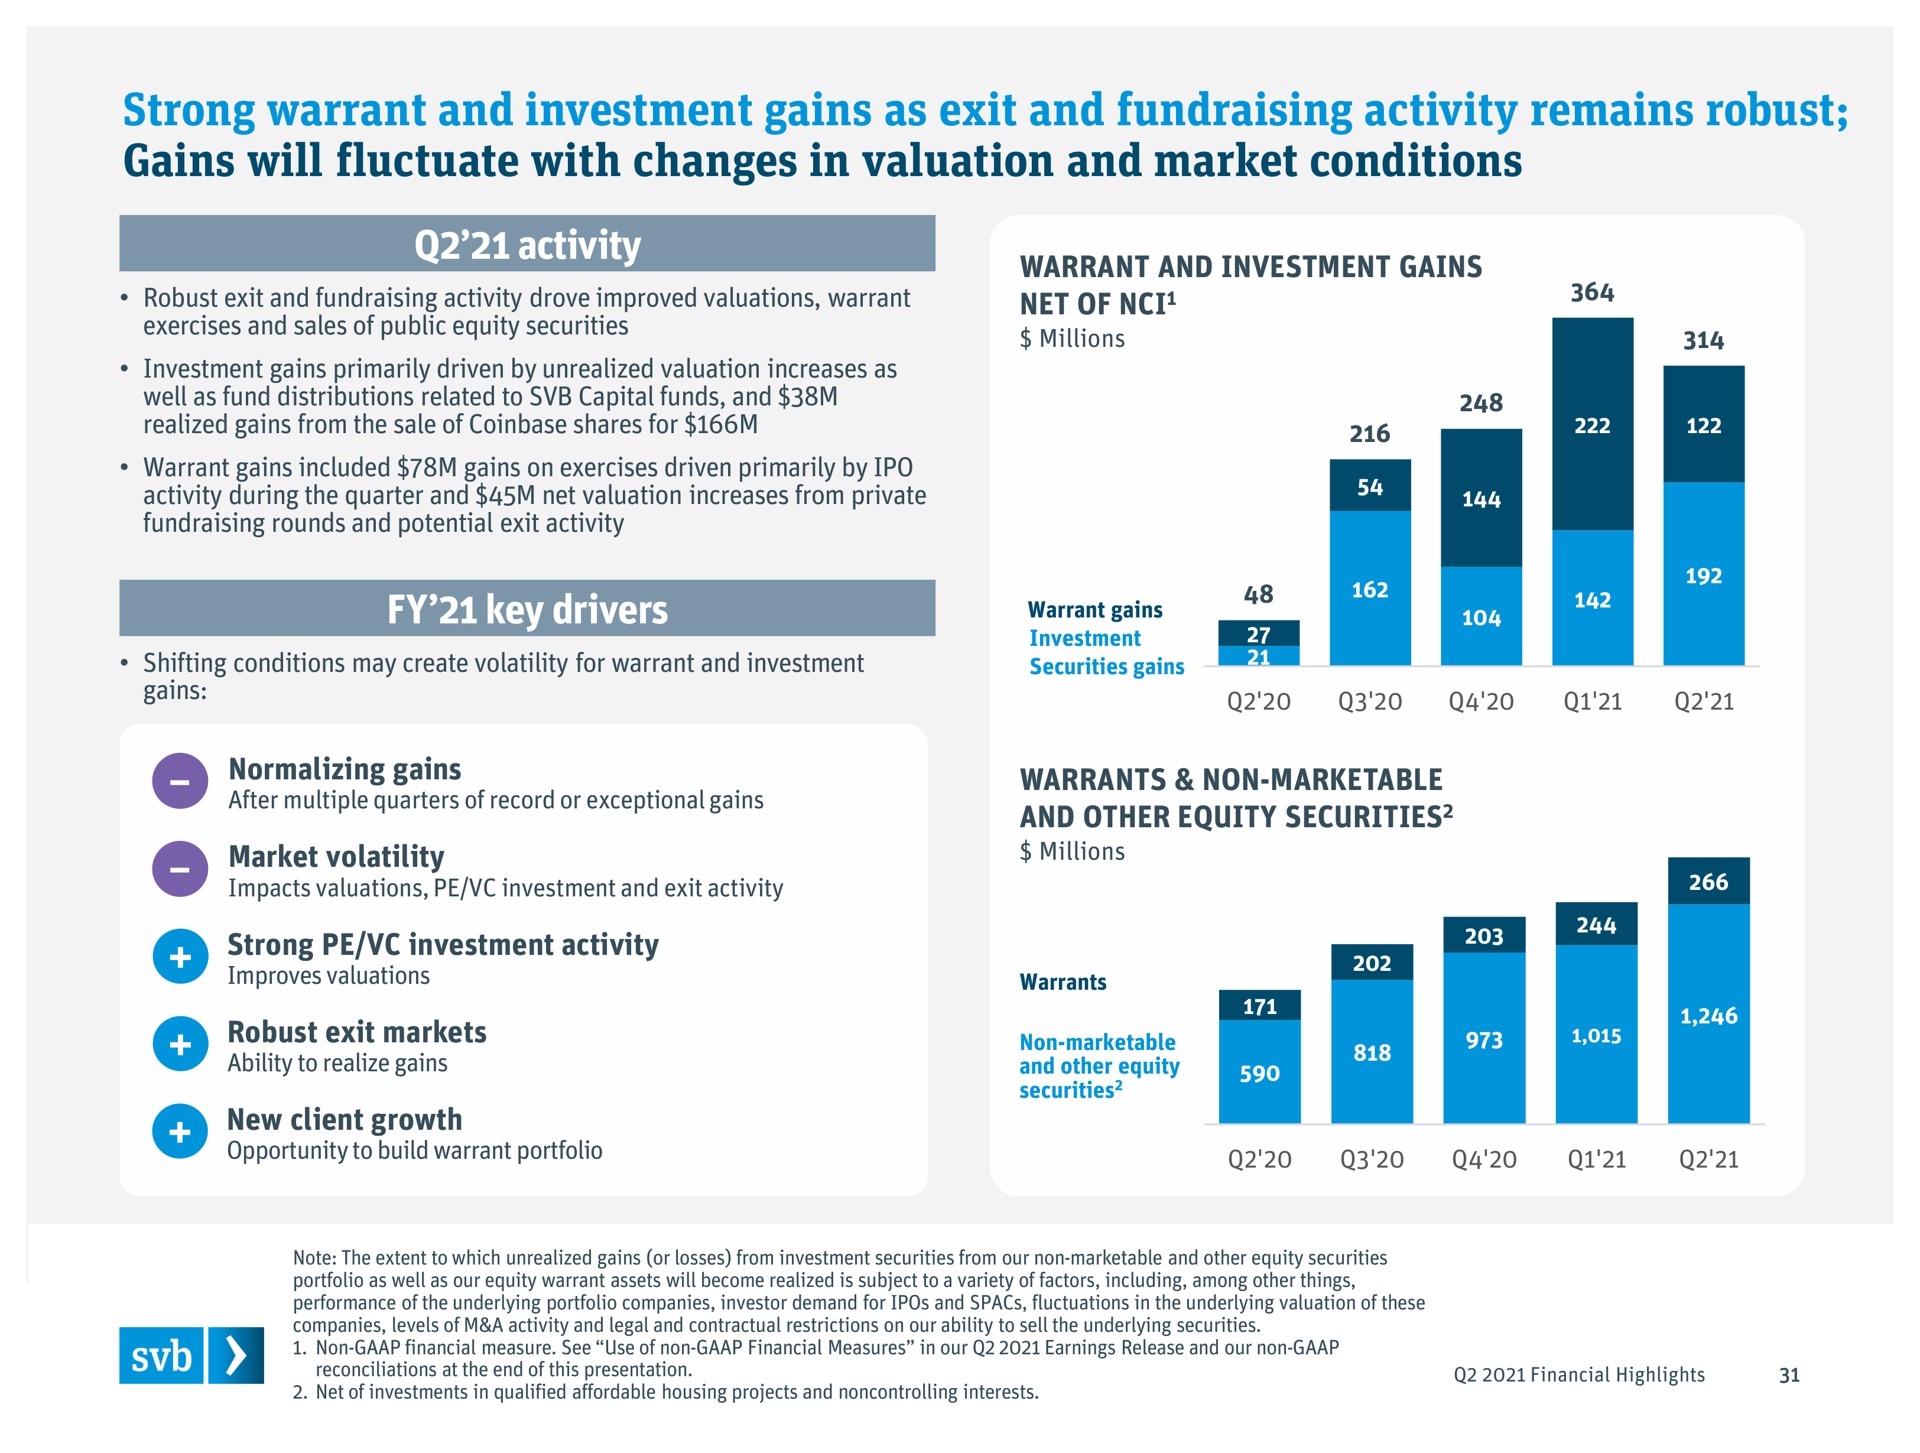 strong warrant and investment gains as exit and activity remains robust gains will fluctuate with changes in valuation and market conditions | Silicon Valley Bank